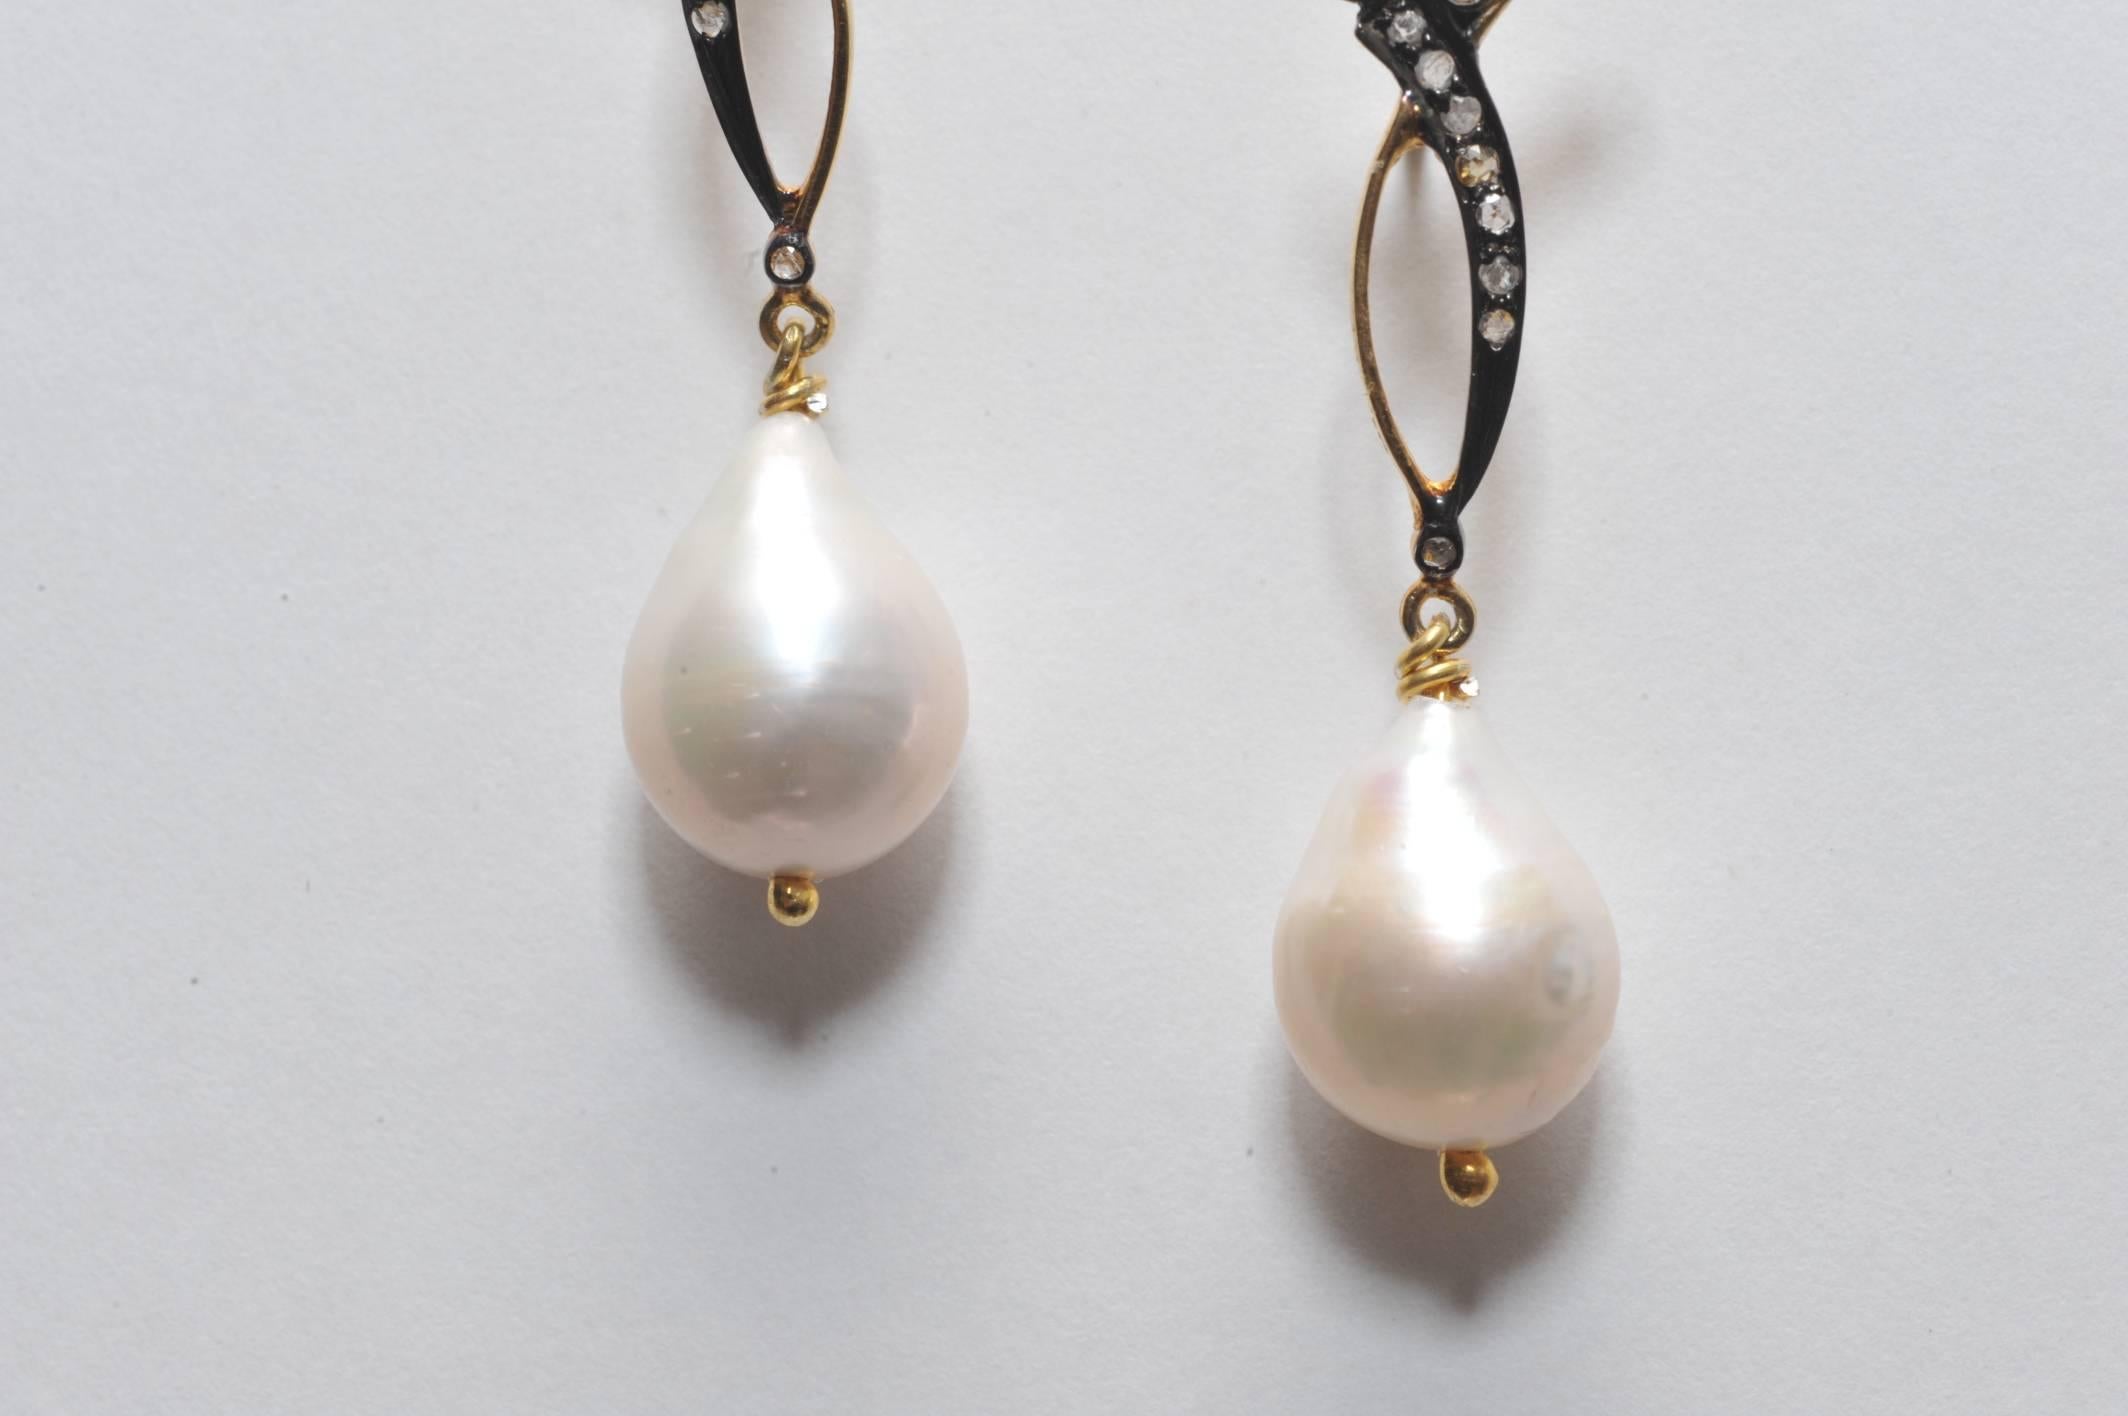 A pair of drop earrings with pear-shaped baroque pearls in a combination of 18K gold and diamonds set in oxidized sterling.  Post is 18K gold for pierced ears.  Pearl weight is 24.05 carats and measure 11mm; diamonds are .27 carats.